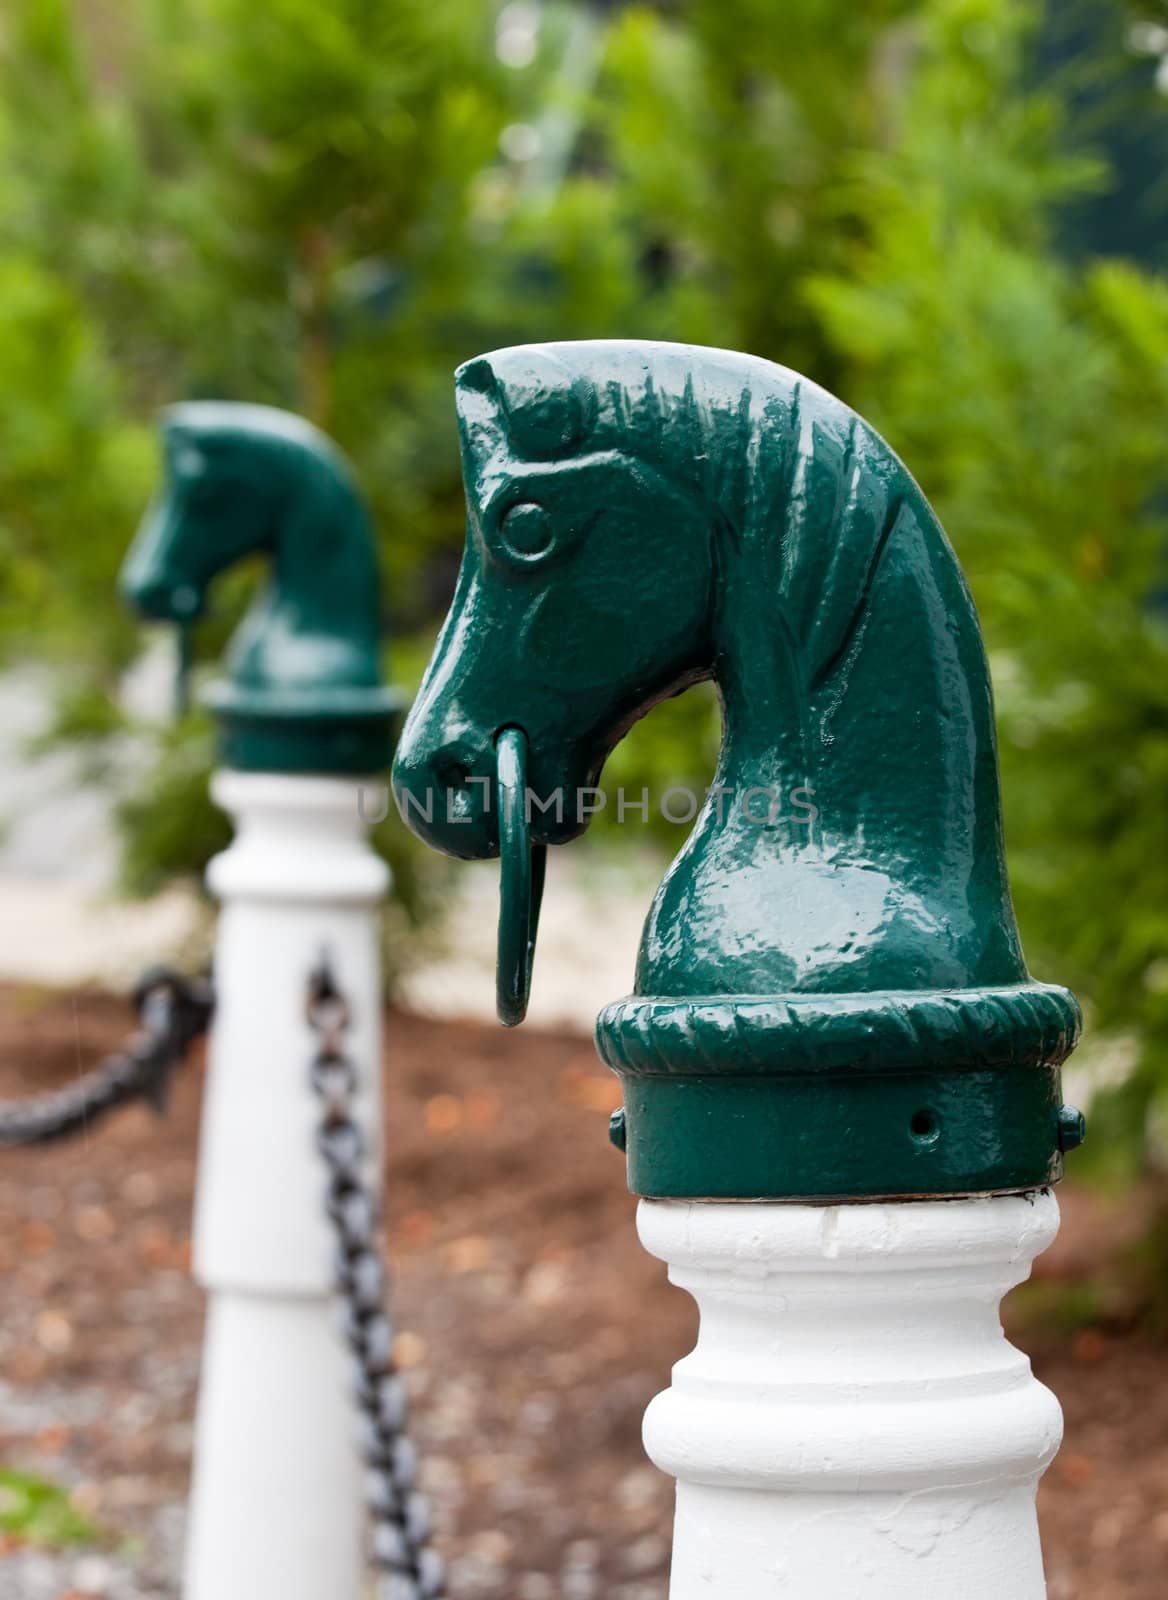 Green painted bollard for tying a horse to and shaped as a horse head